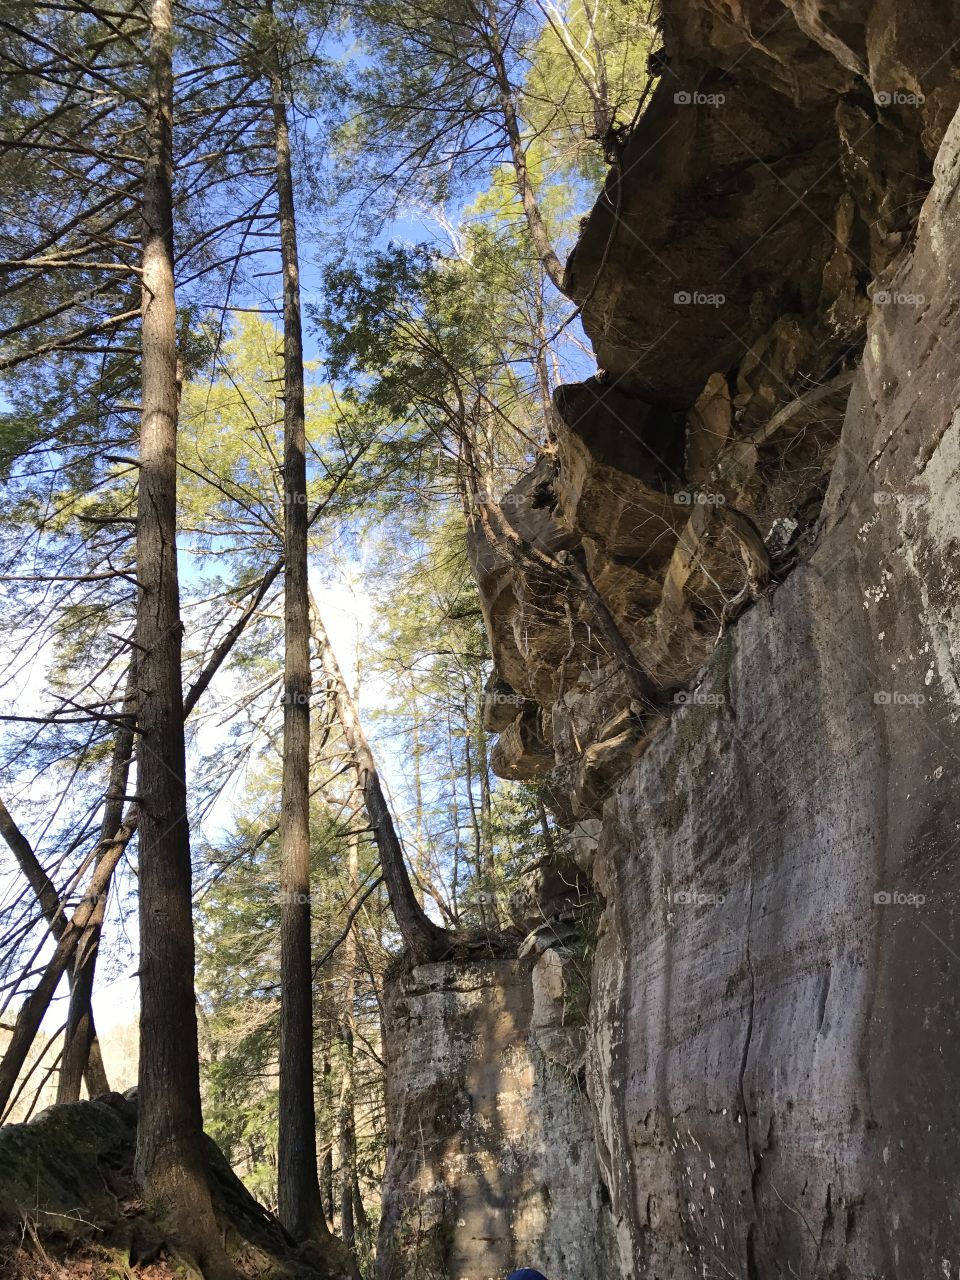 Cliff in the forest near Cumberland Falls 